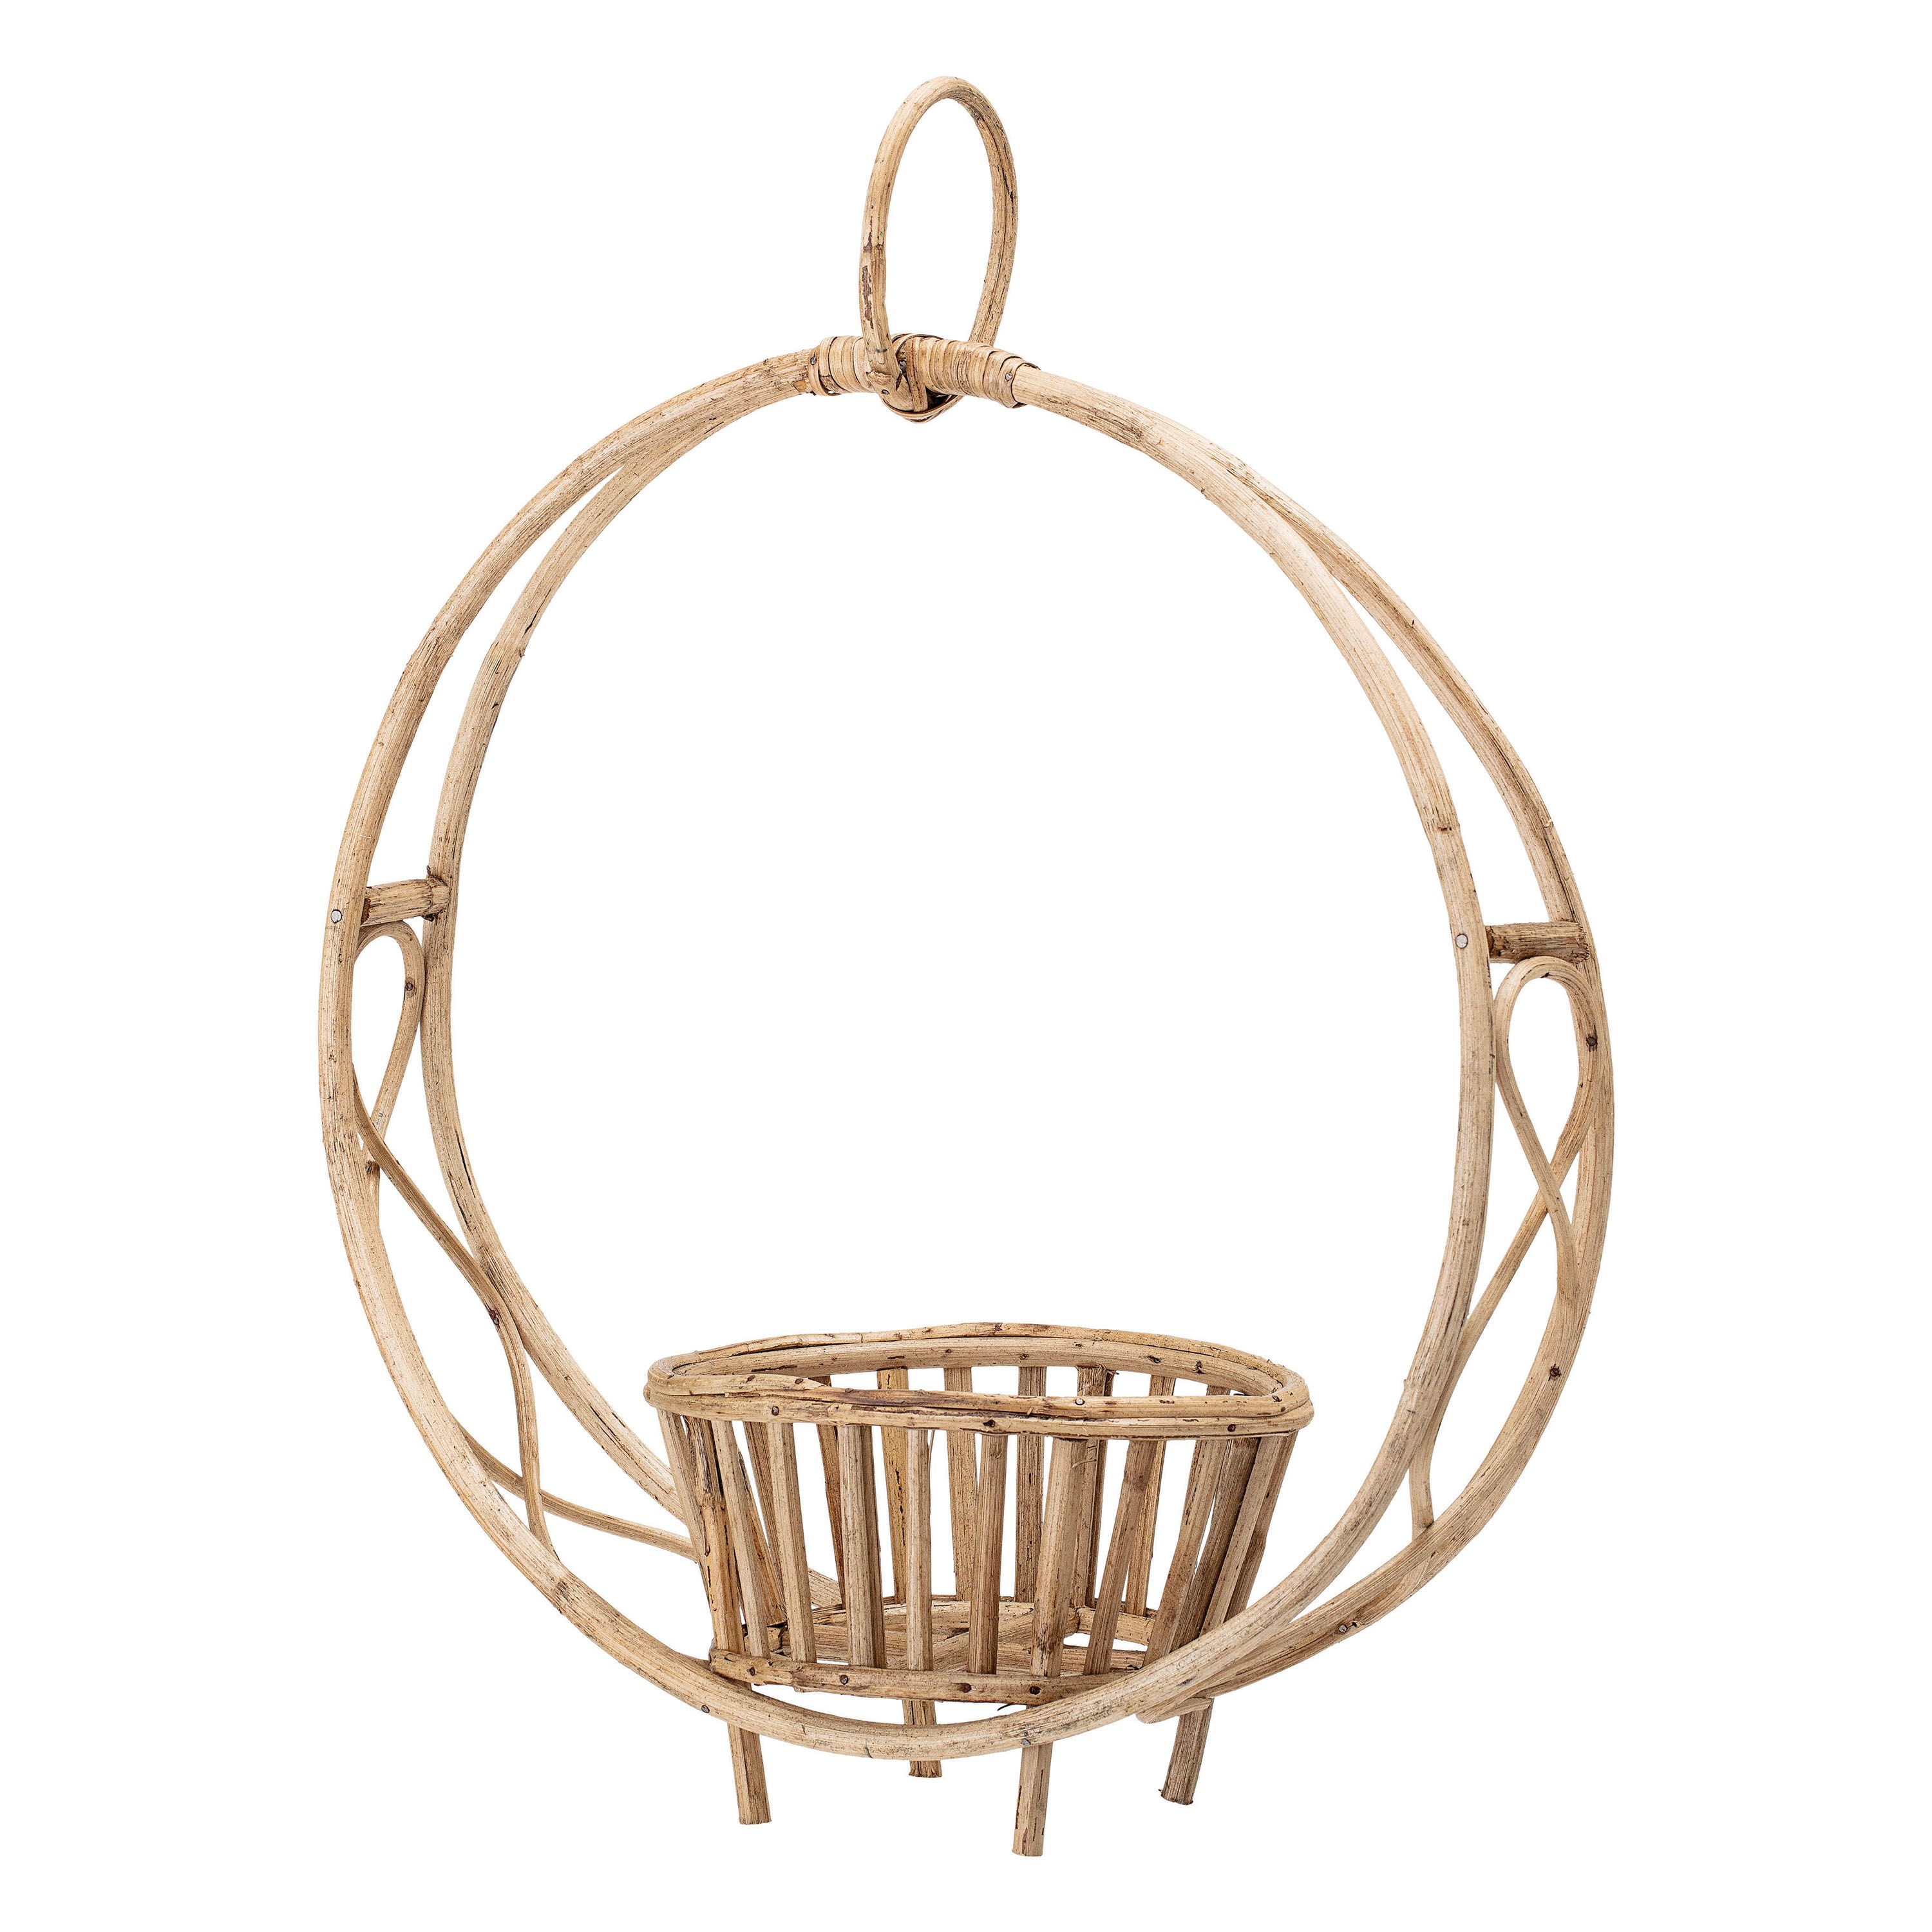 17"L x 7-3/4"W x 21-1/2"H Rattan Planter Holder (Holds 5" Pot) (Hangs or Sits)